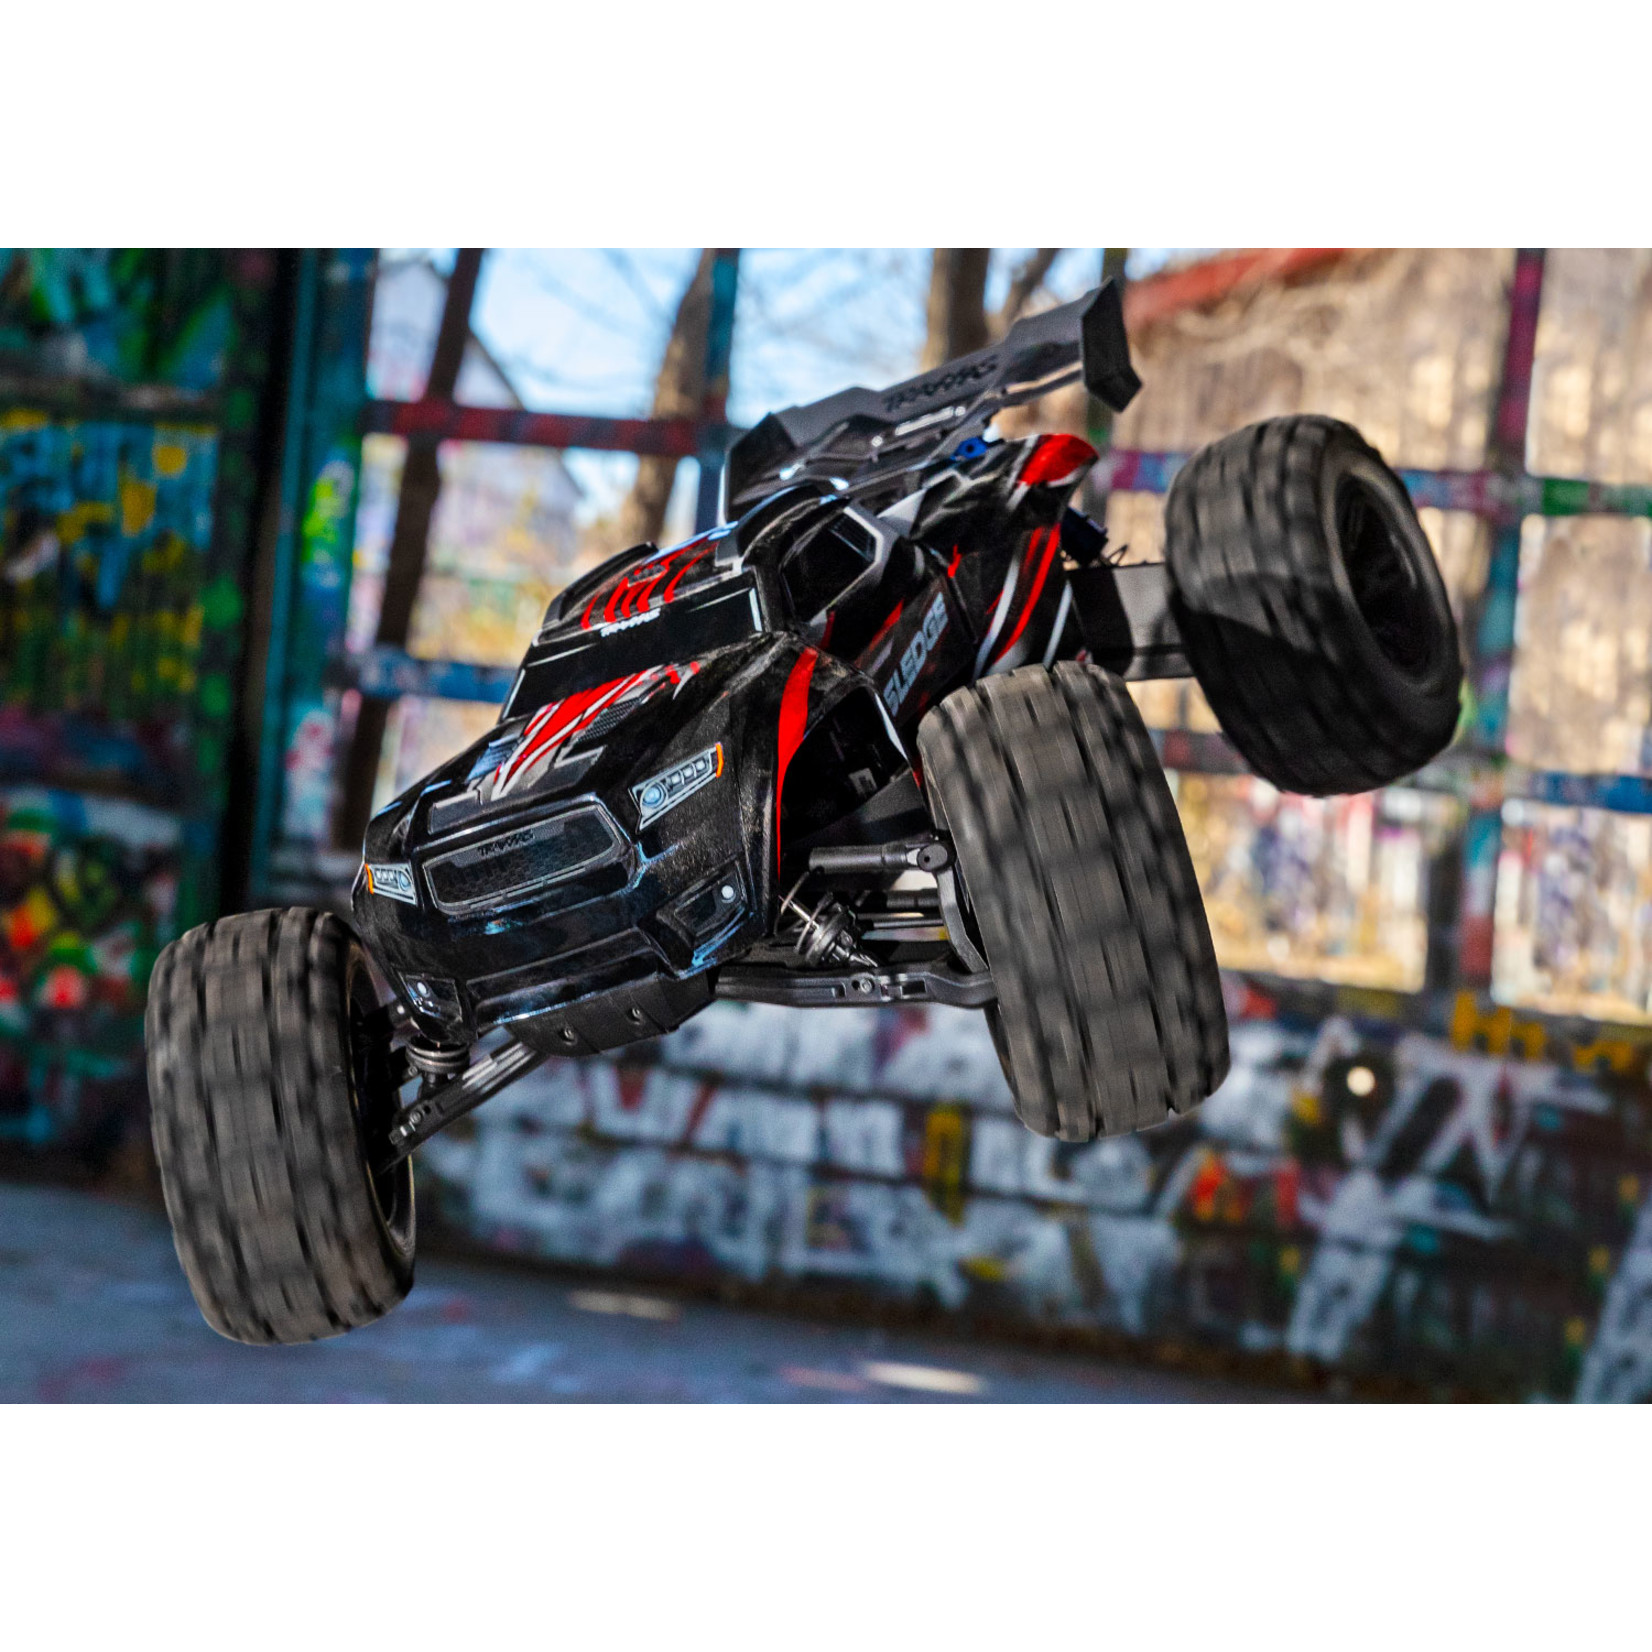 Traxxas Sledge: 1/8 Scale 4WD Brushless Electric Monster Truck with Traxxas Stability Management (TSM)